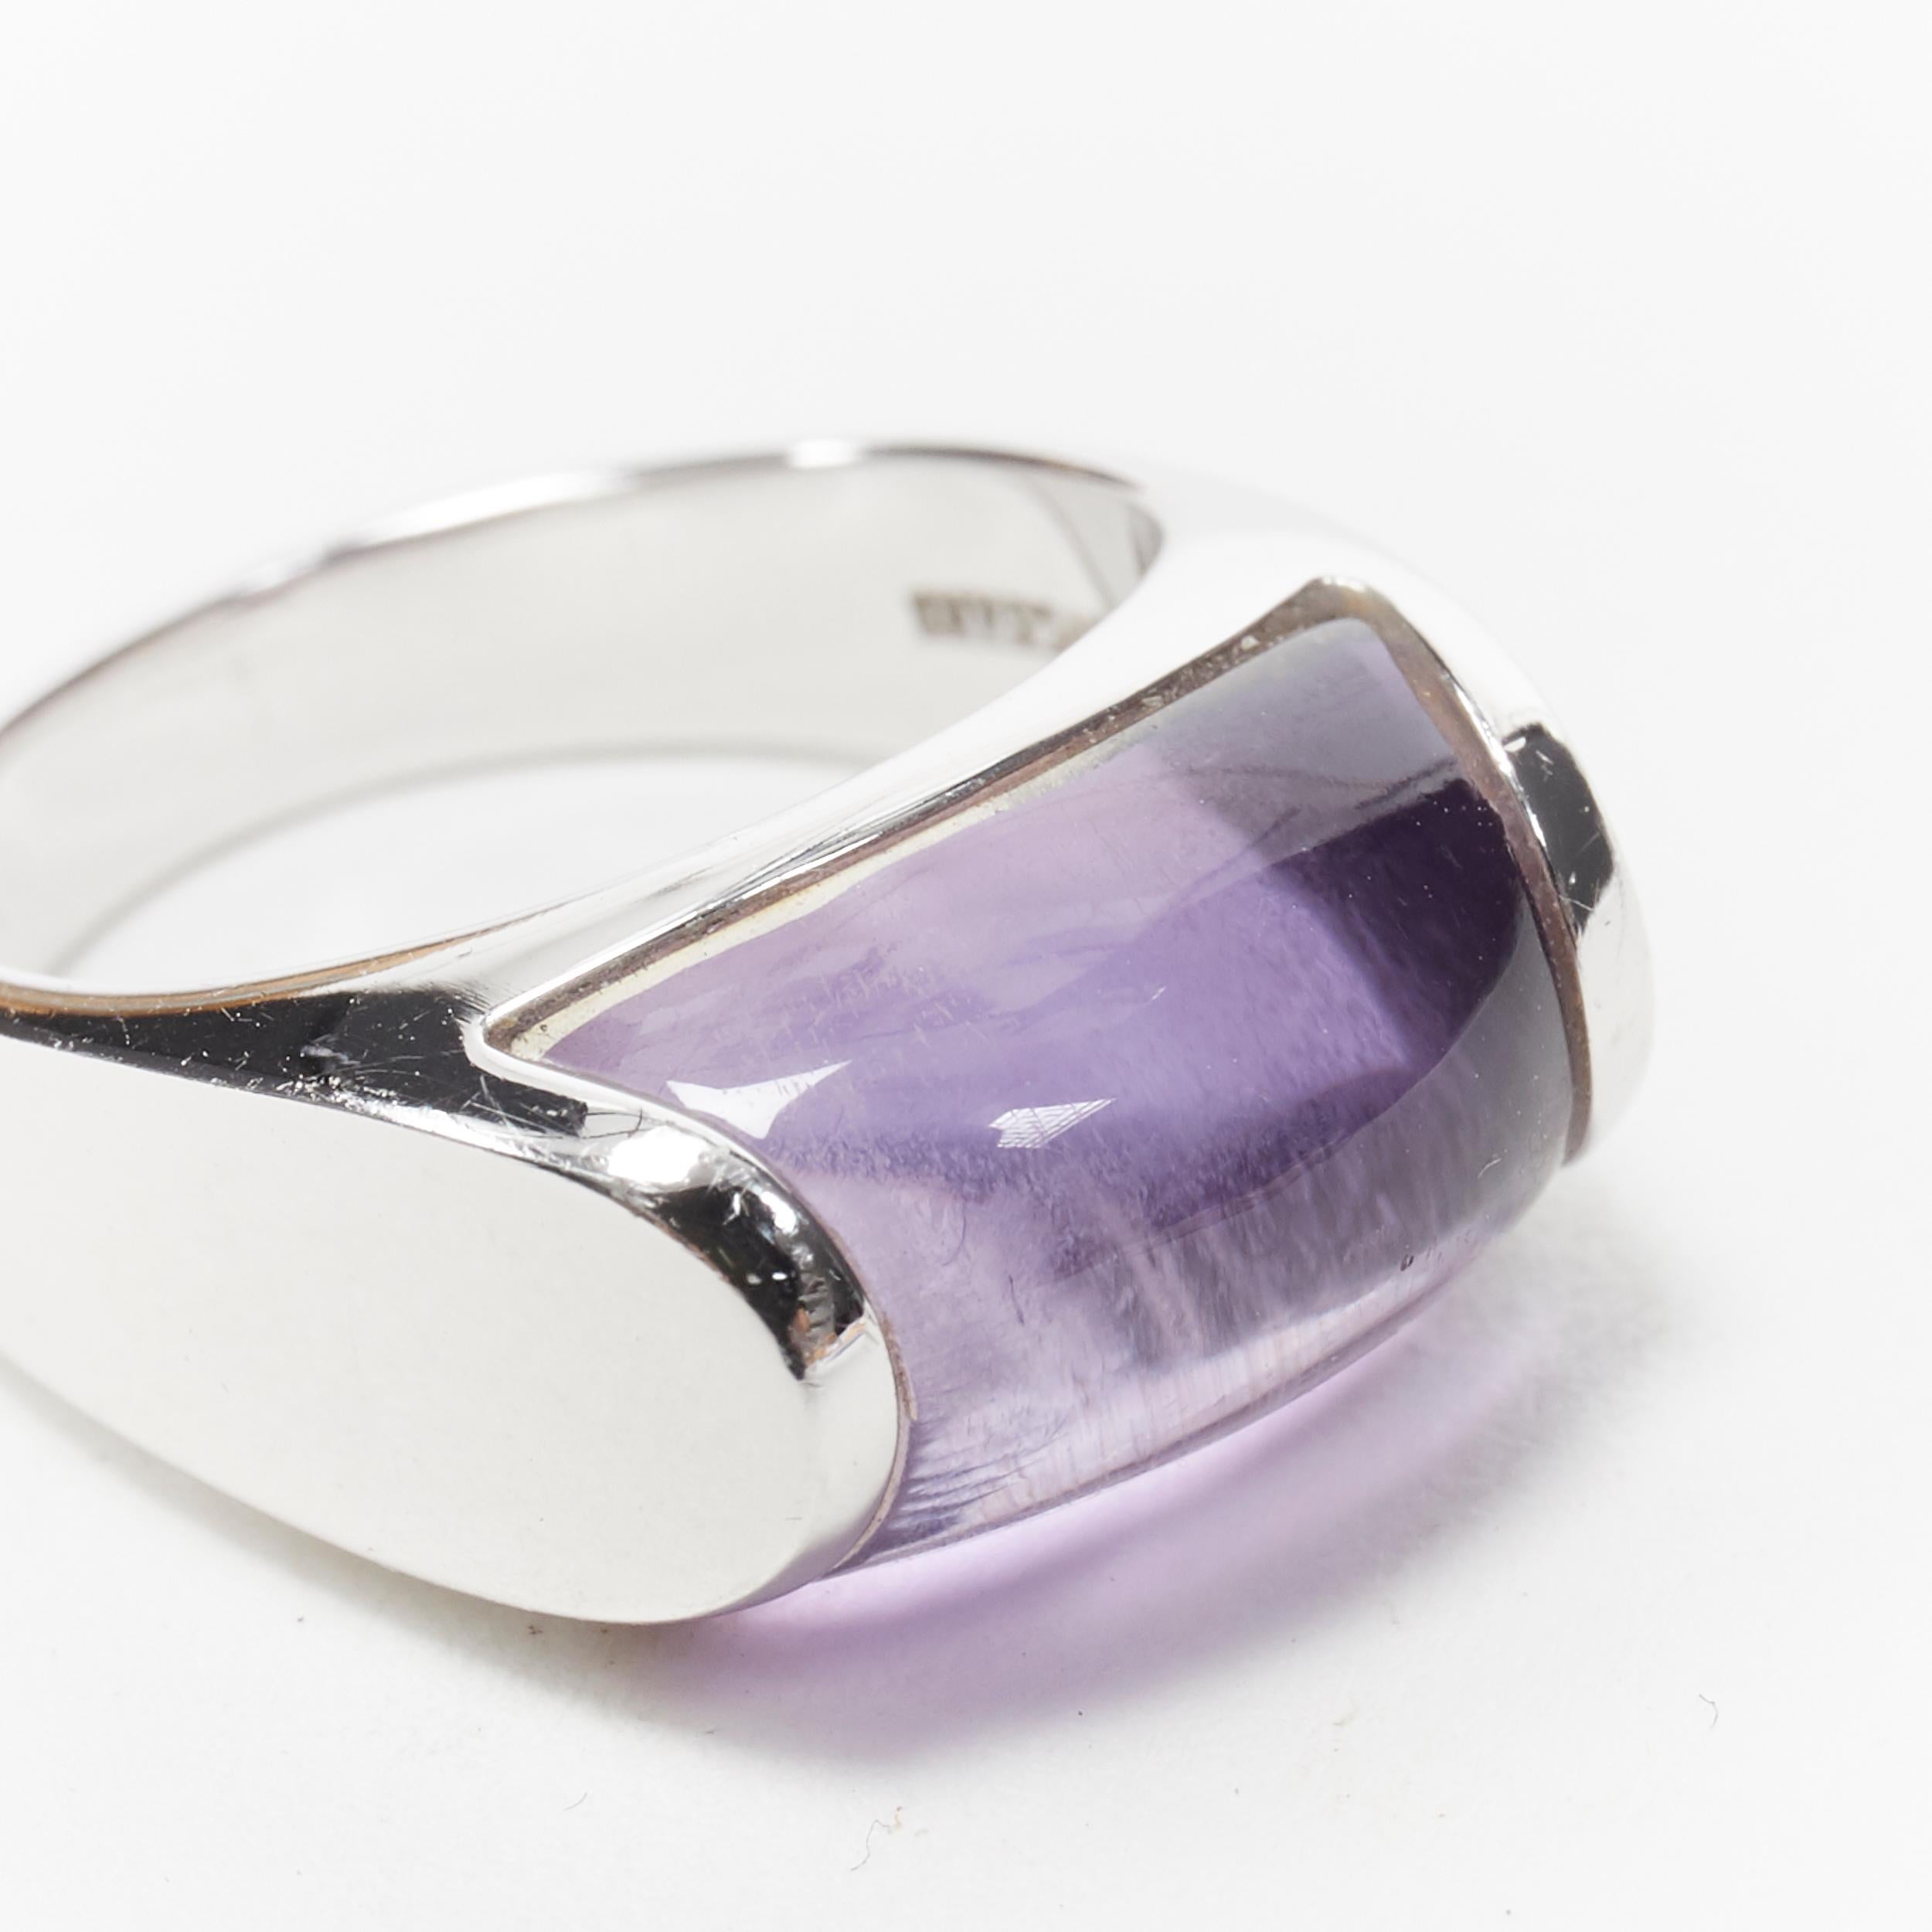 vintage BULGARI JEWELLERY Amethyst stone silver curved ring 
Reference: EHKO/A00001 
Brand: Bulgari 
Material: Silver 
Color: Silver 
Pattern: Solid 
Extra Detail: Silver with purple amethyst stone. 

CONDITION: 
Condition: Good, this item was